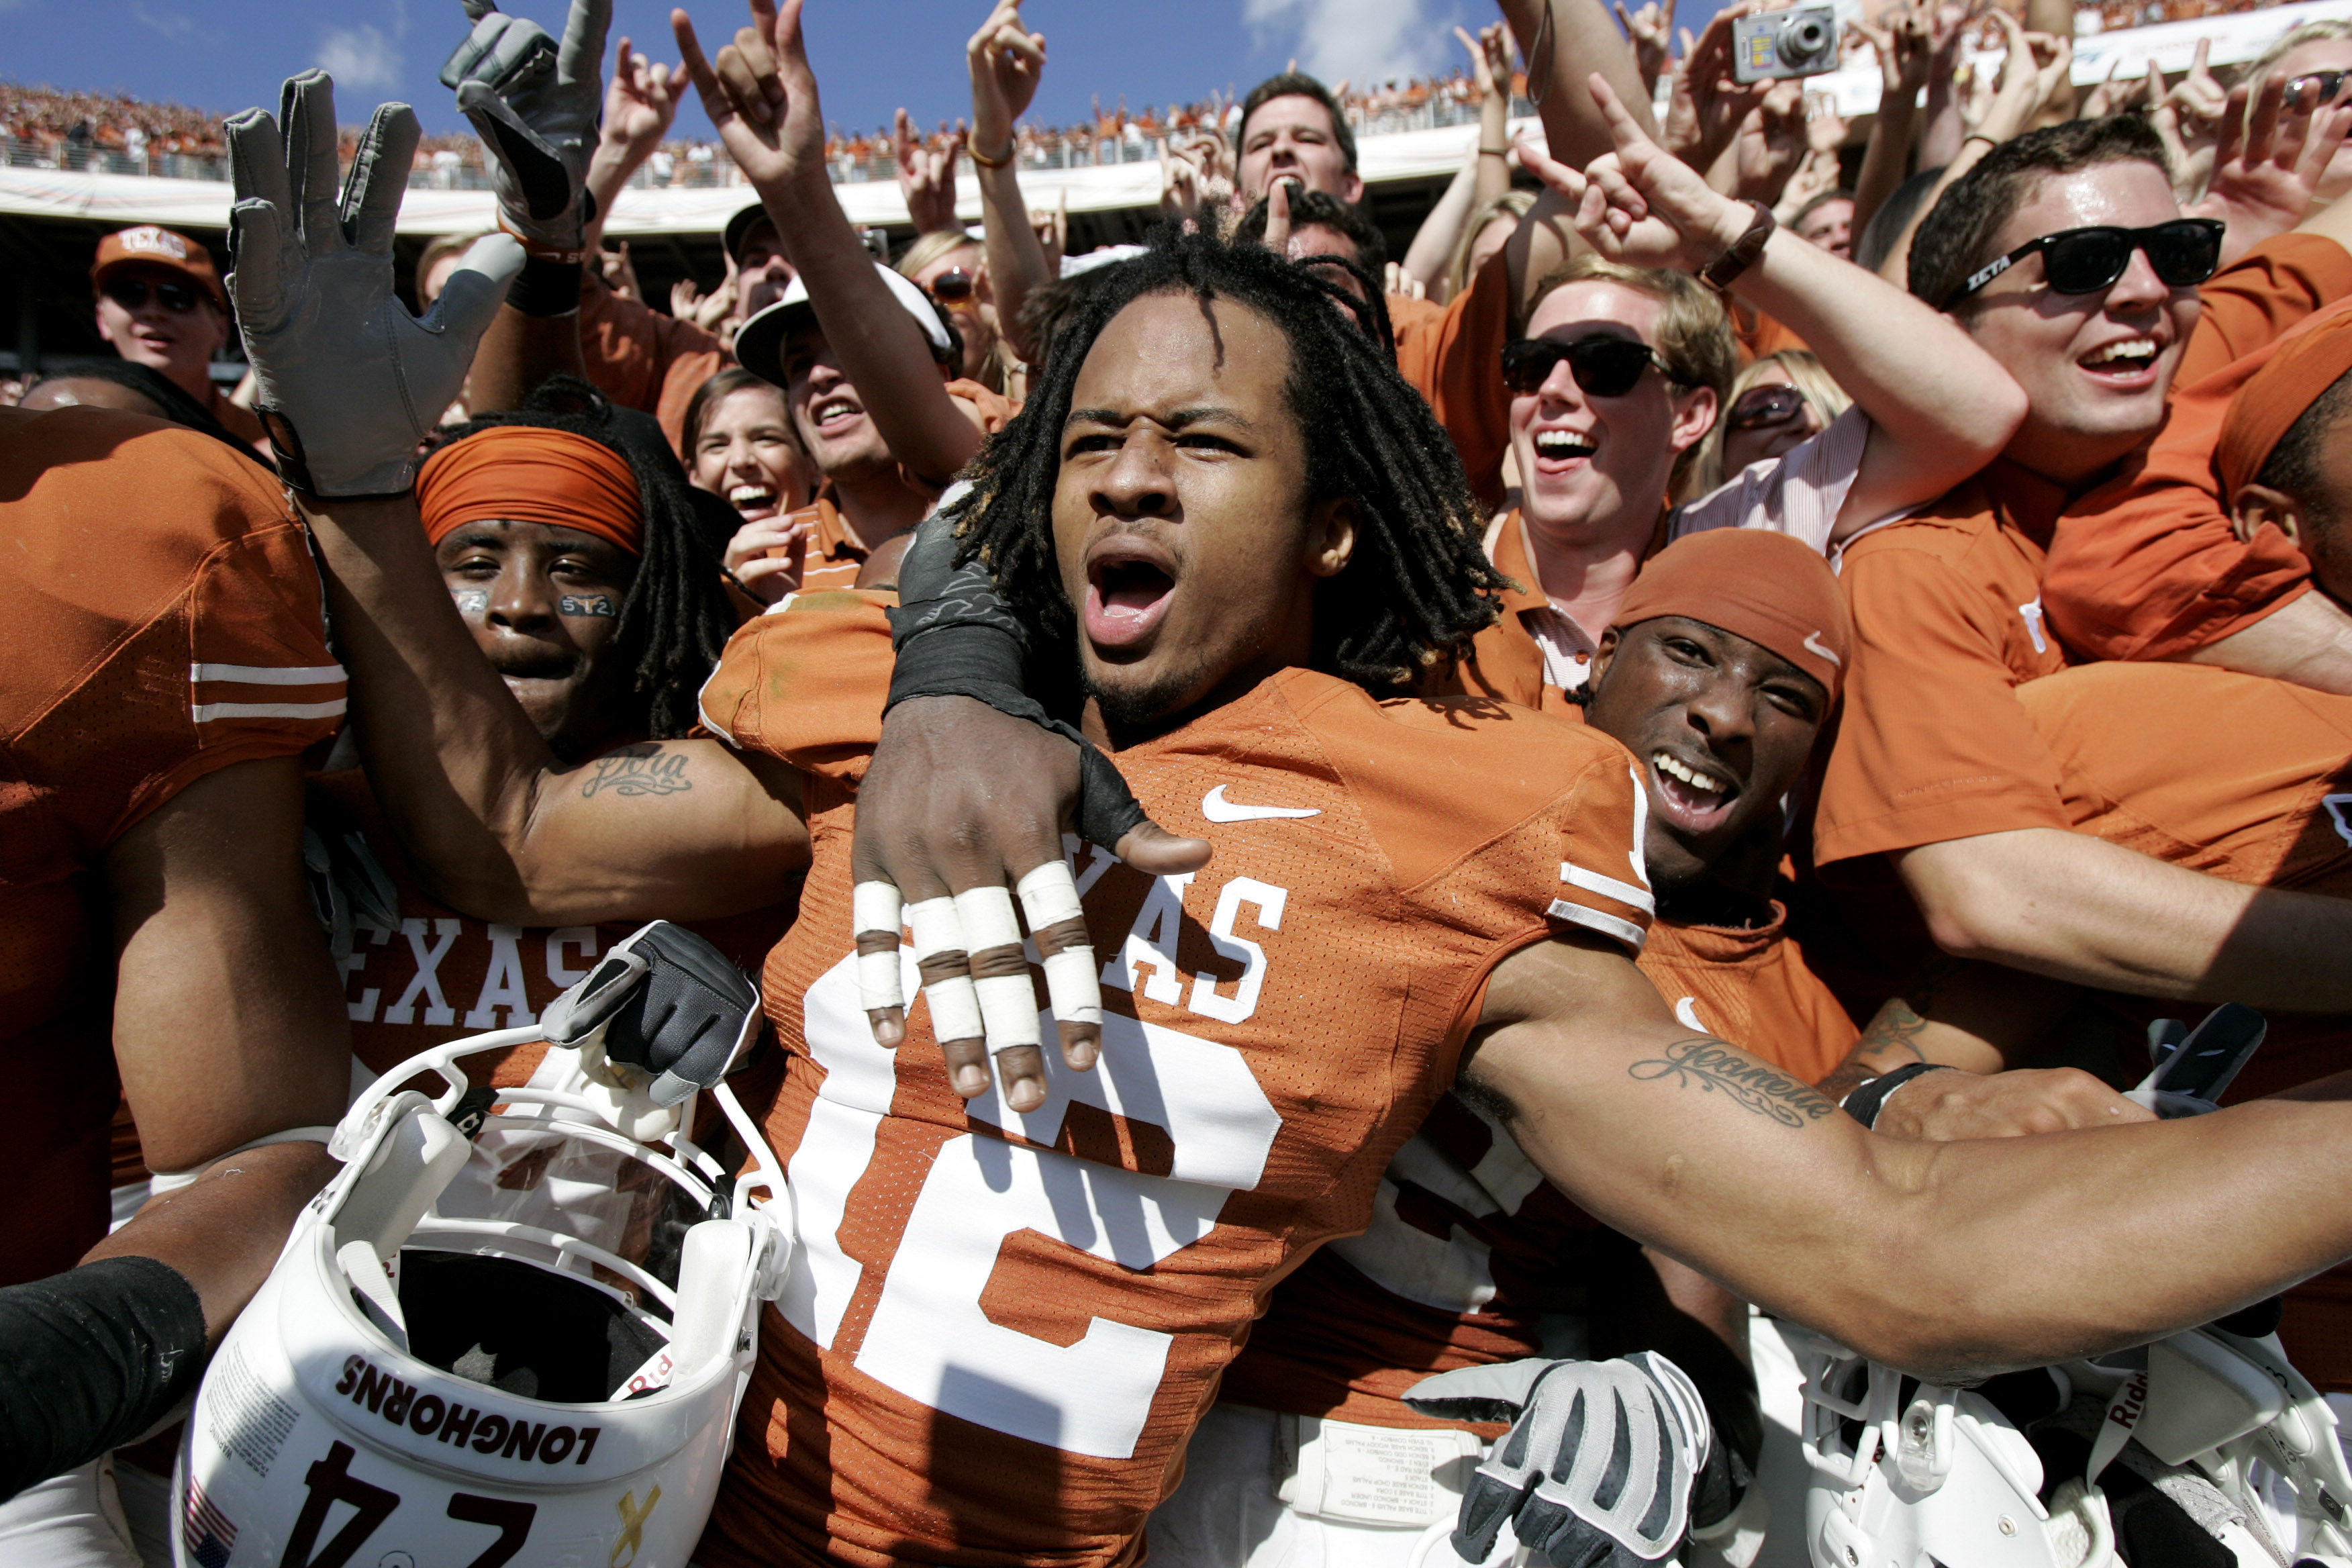 PHOTO GALLERY Texas Longhorns first round draft picks since 1999